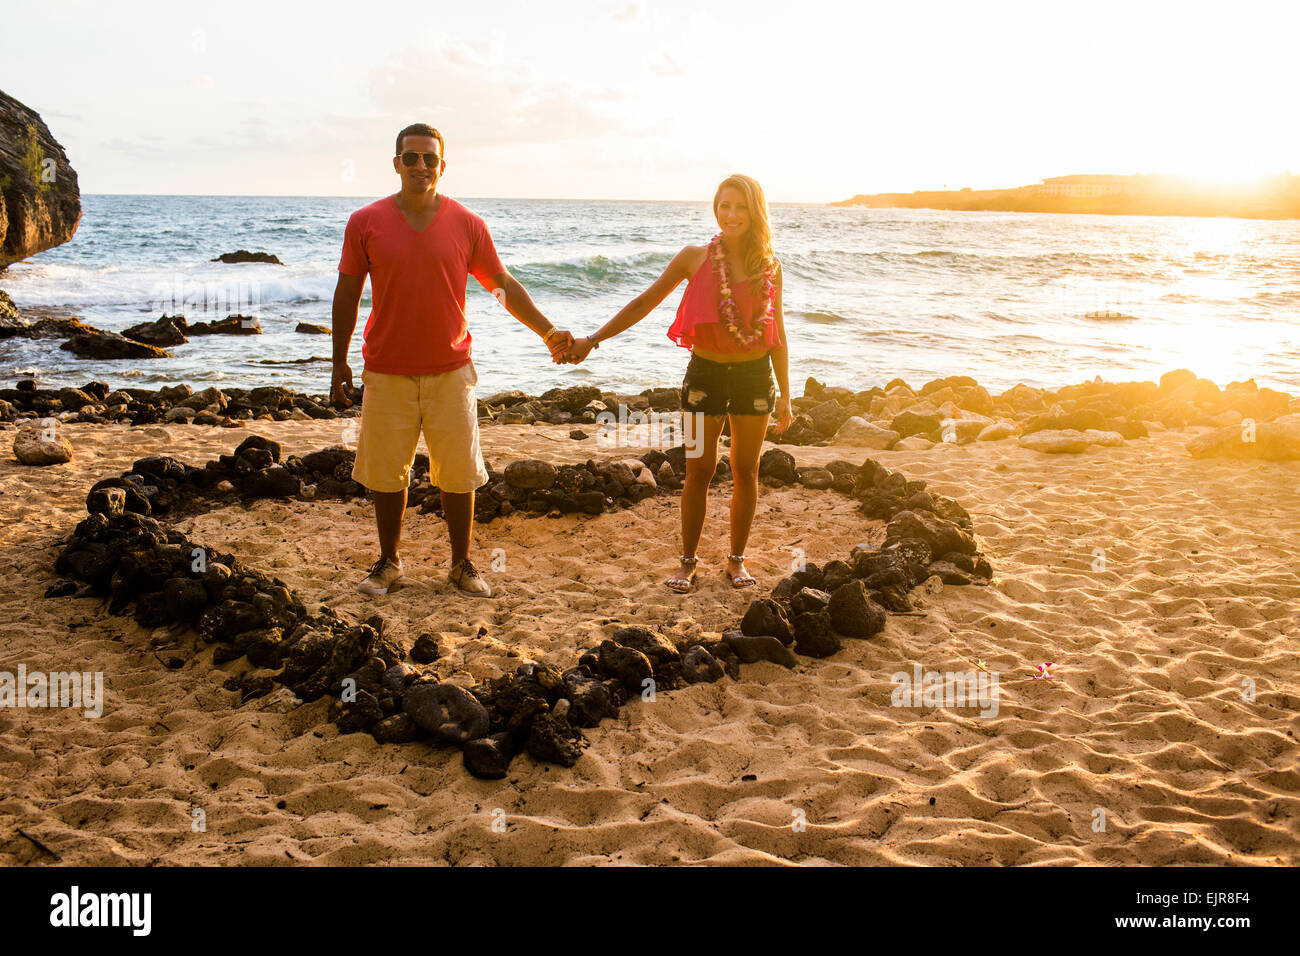 Couple holding hands in heart shape on beach Banque D'Images